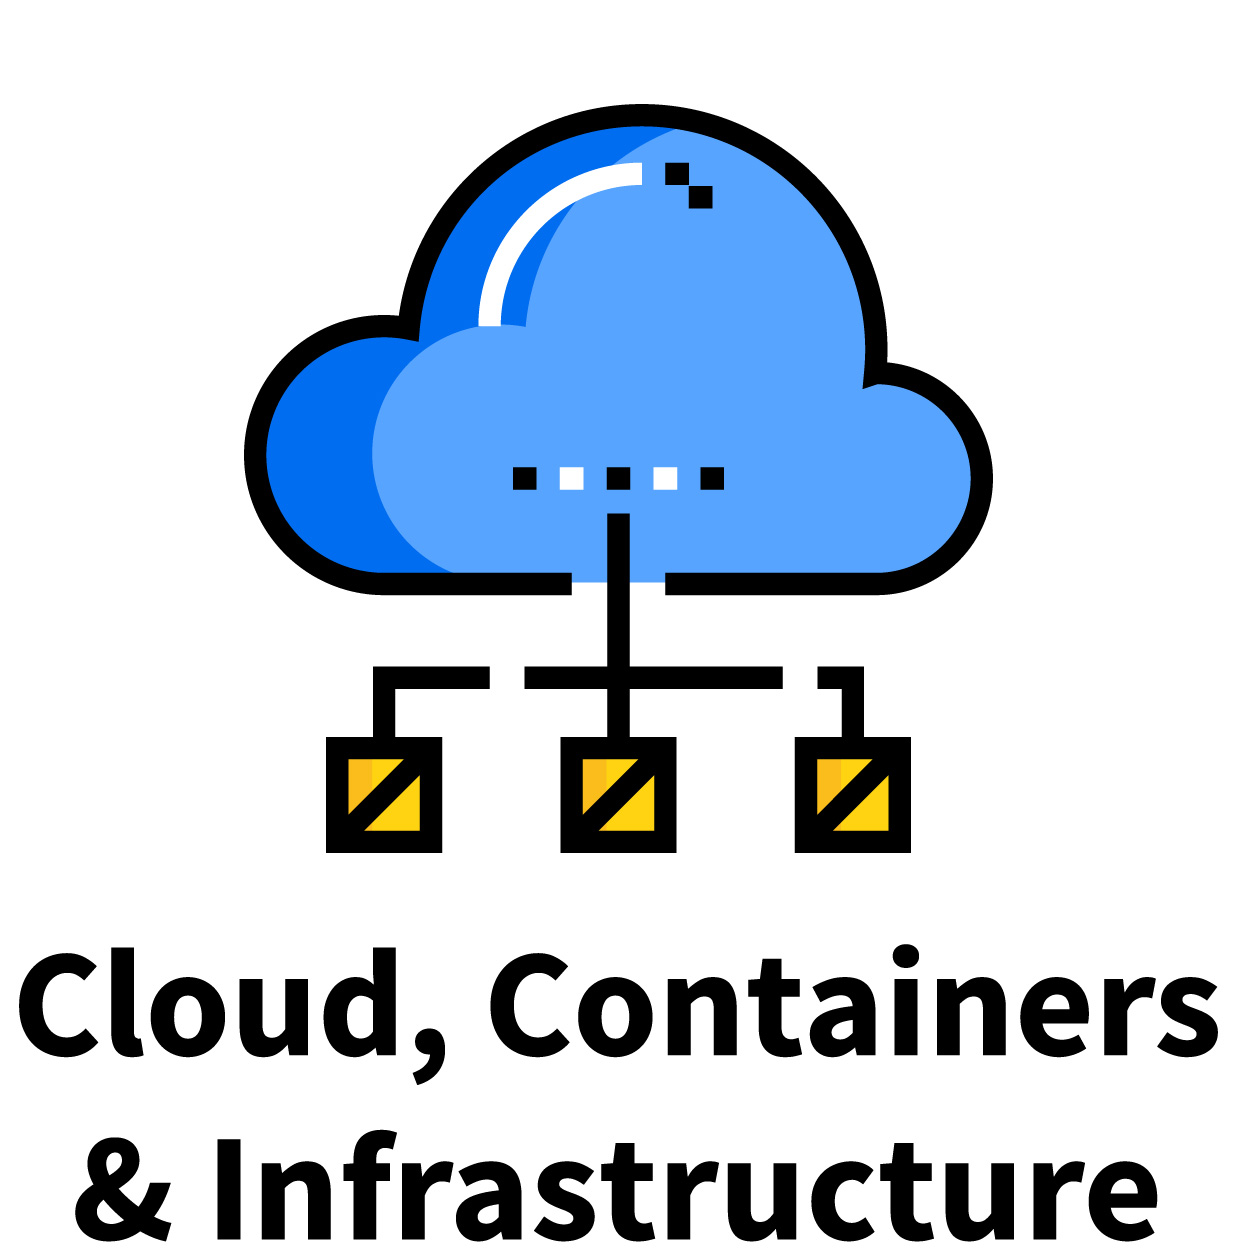 Cloud, Containers and Infrastructure